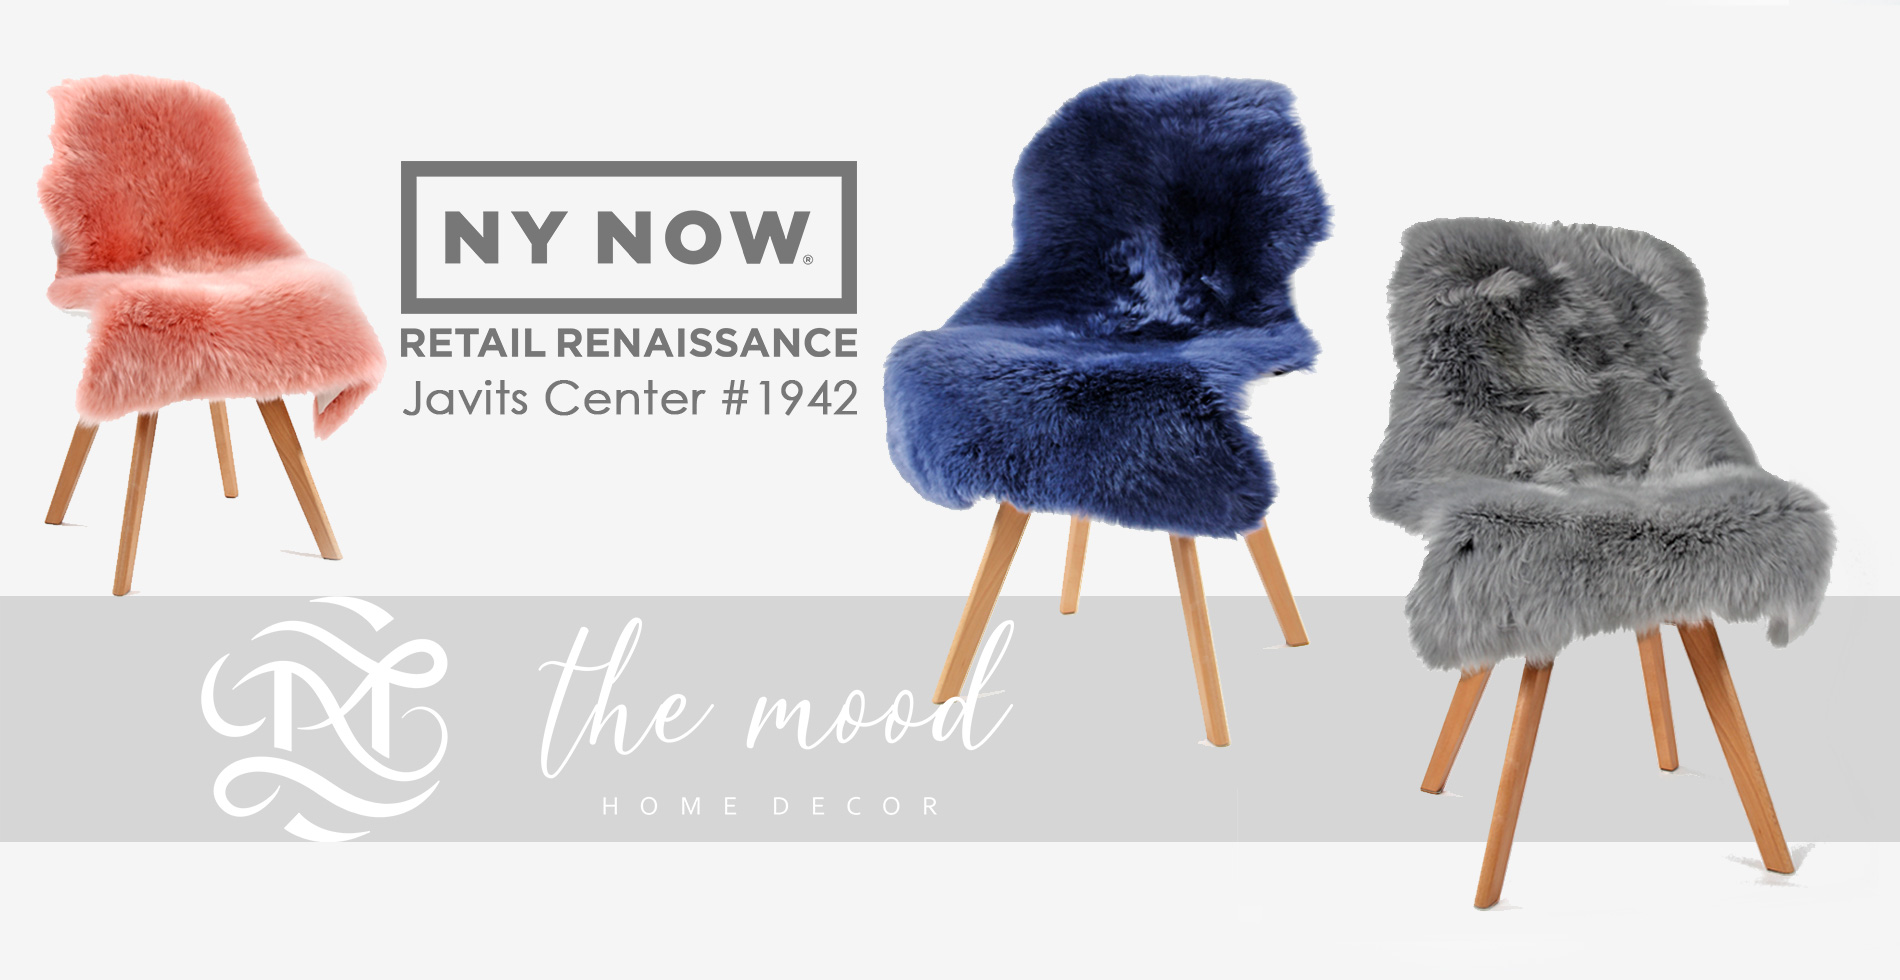 The Mood featured sheepskin throw rugs on NY NOW 2020